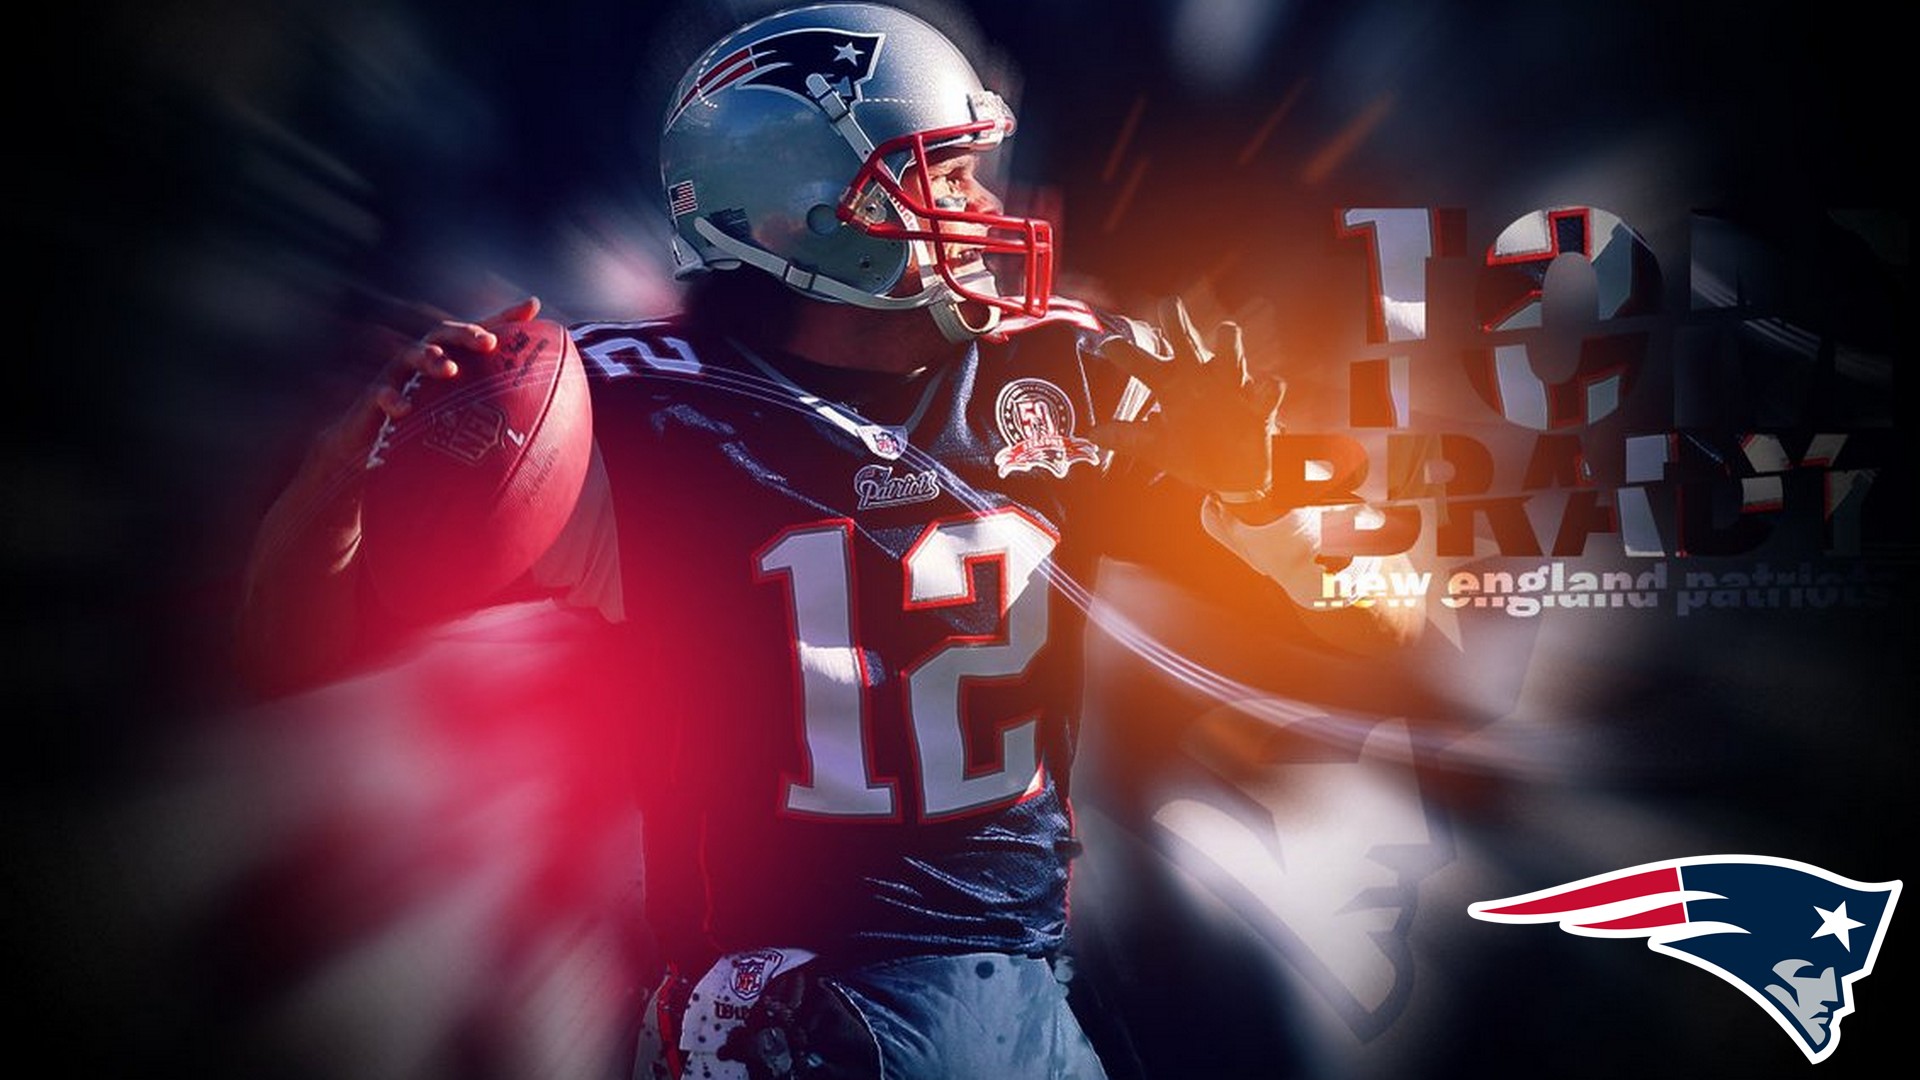 HD Tom Brady Super Bowl Backgrounds with resolution 1920x1080 pixel. You can make this wallpaper for your Mac or Windows Desktop Background, iPhone, Android or Tablet and another Smartphone device